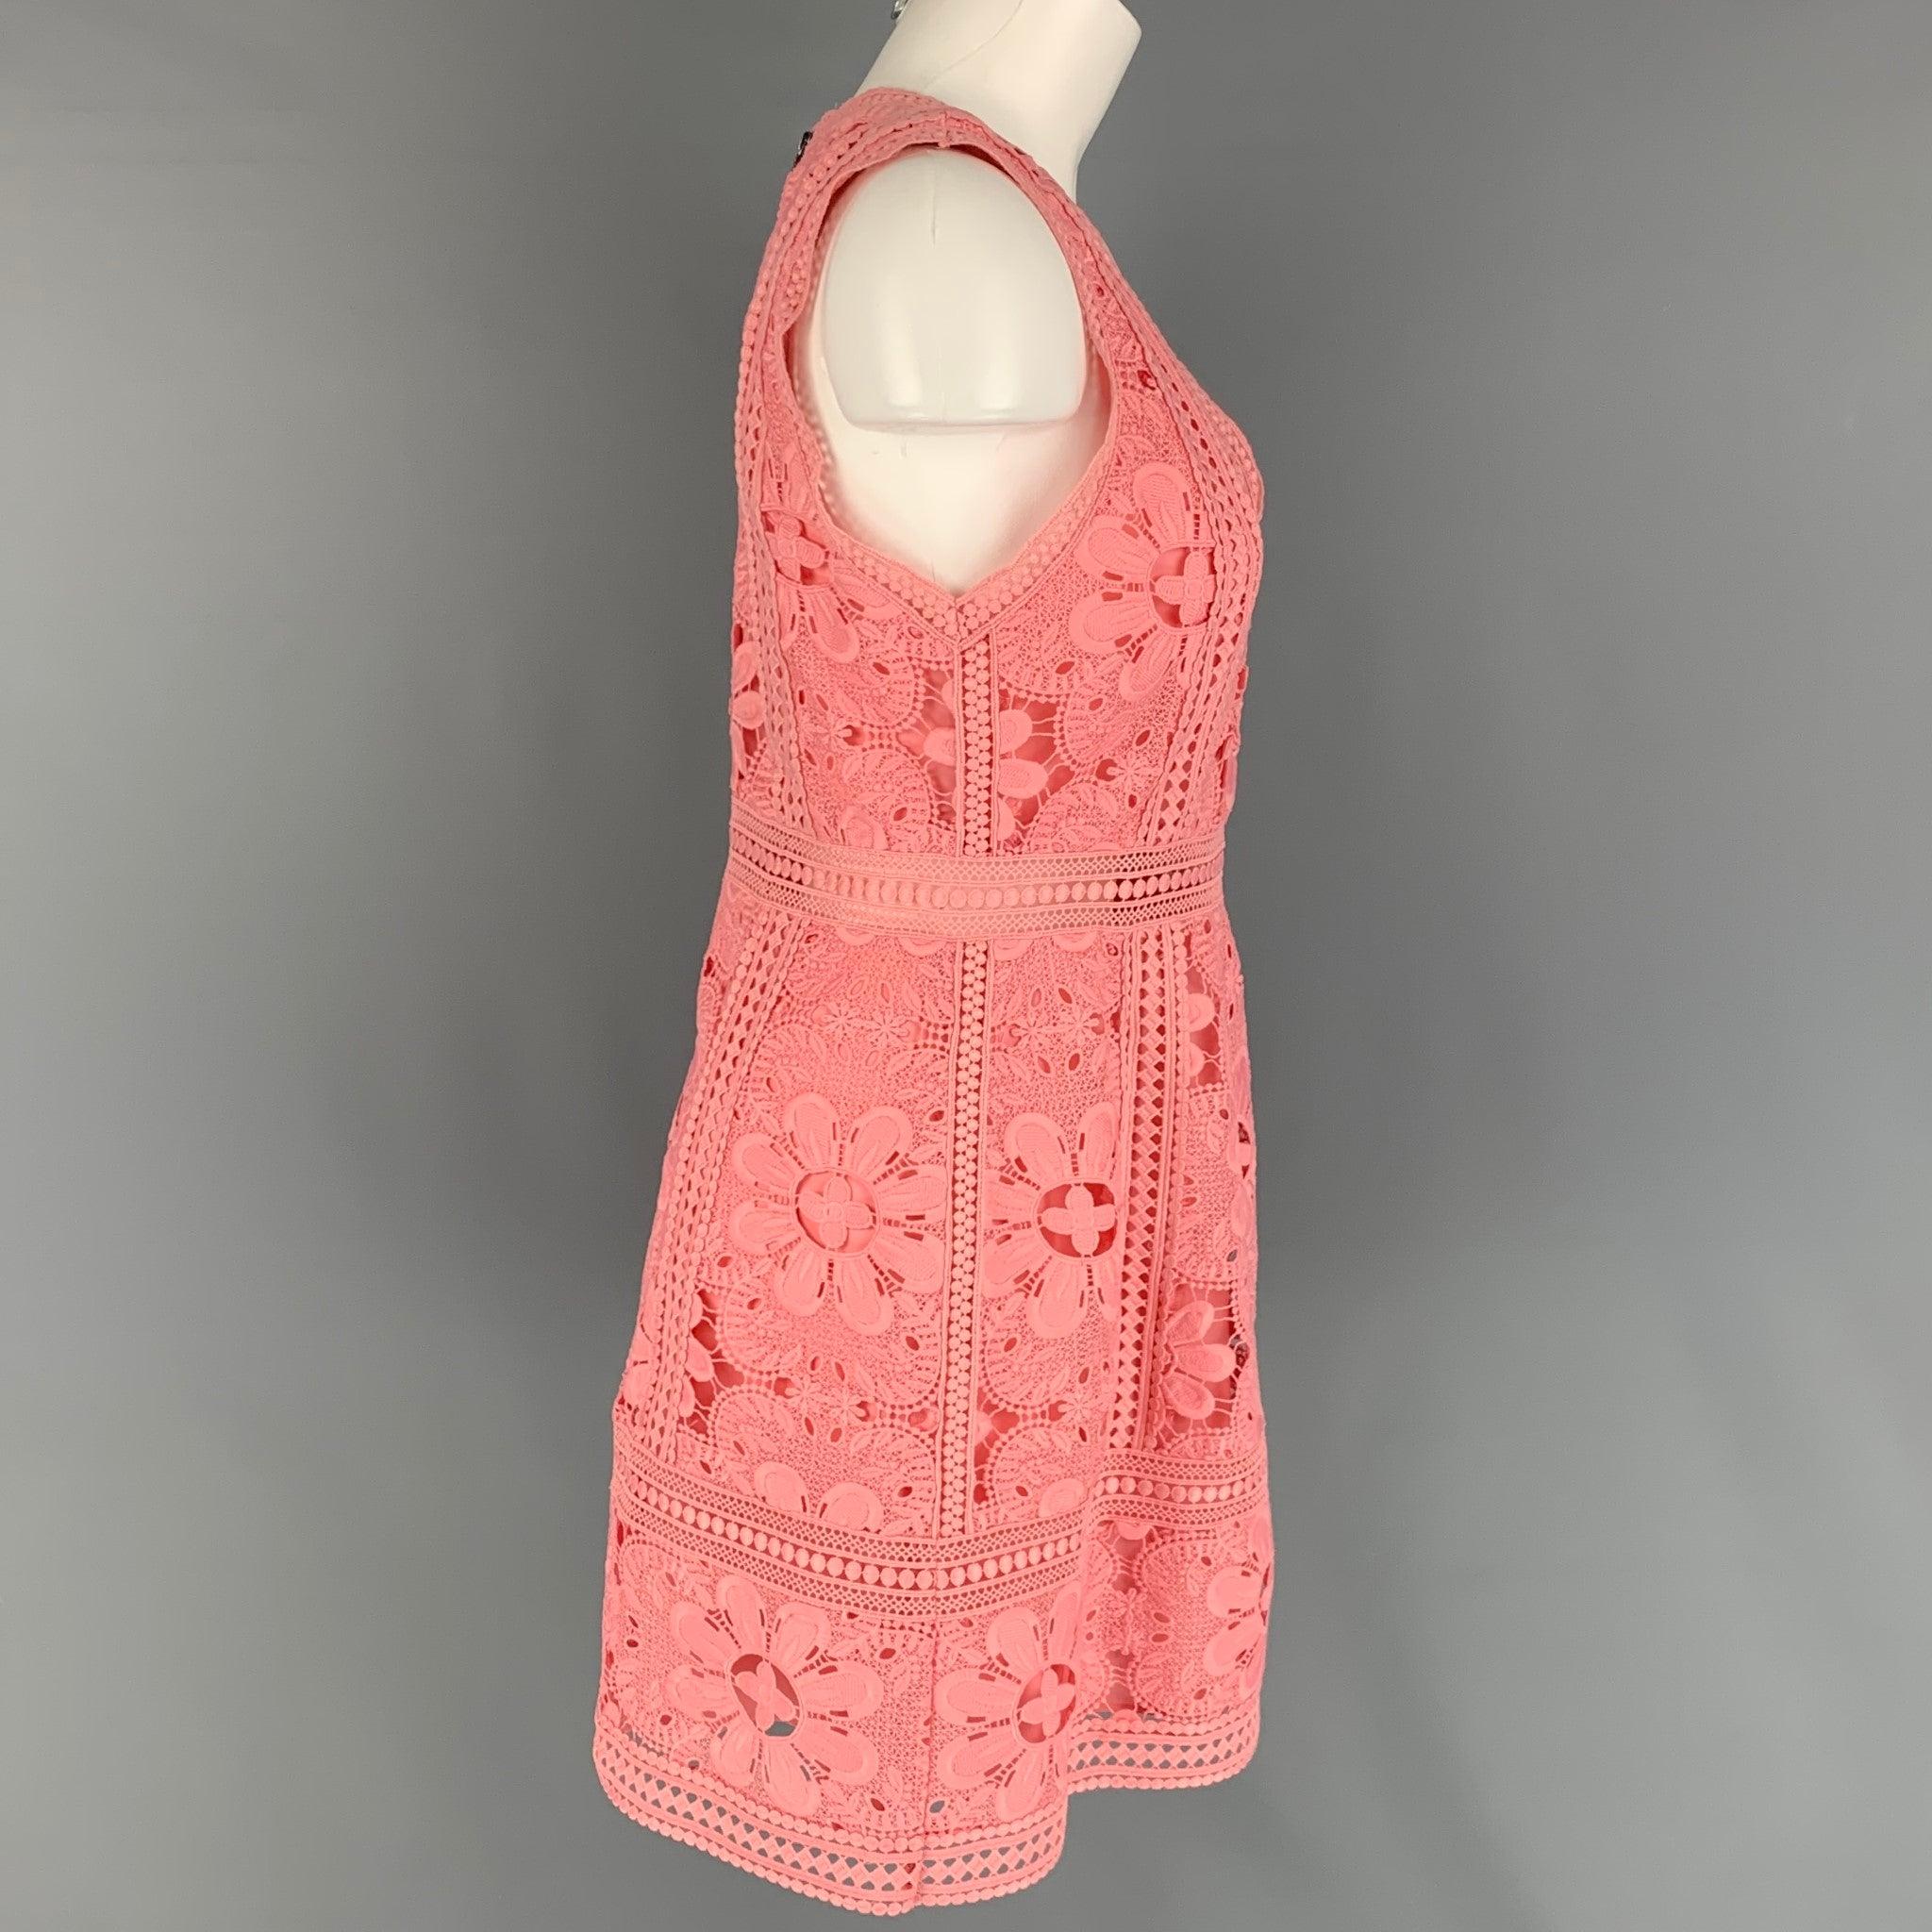 ALICE + OLIVIA dress comes in a rose pink lace polyester with a slip liner featuring an a-line style, v-neck, and a back zip up closure.
Very Good
Pre-Owned Condition. 

Marked:   6 

Measurements: 
 
Shoulder: 13 inches  Bust: 32 inches  Waist: 28